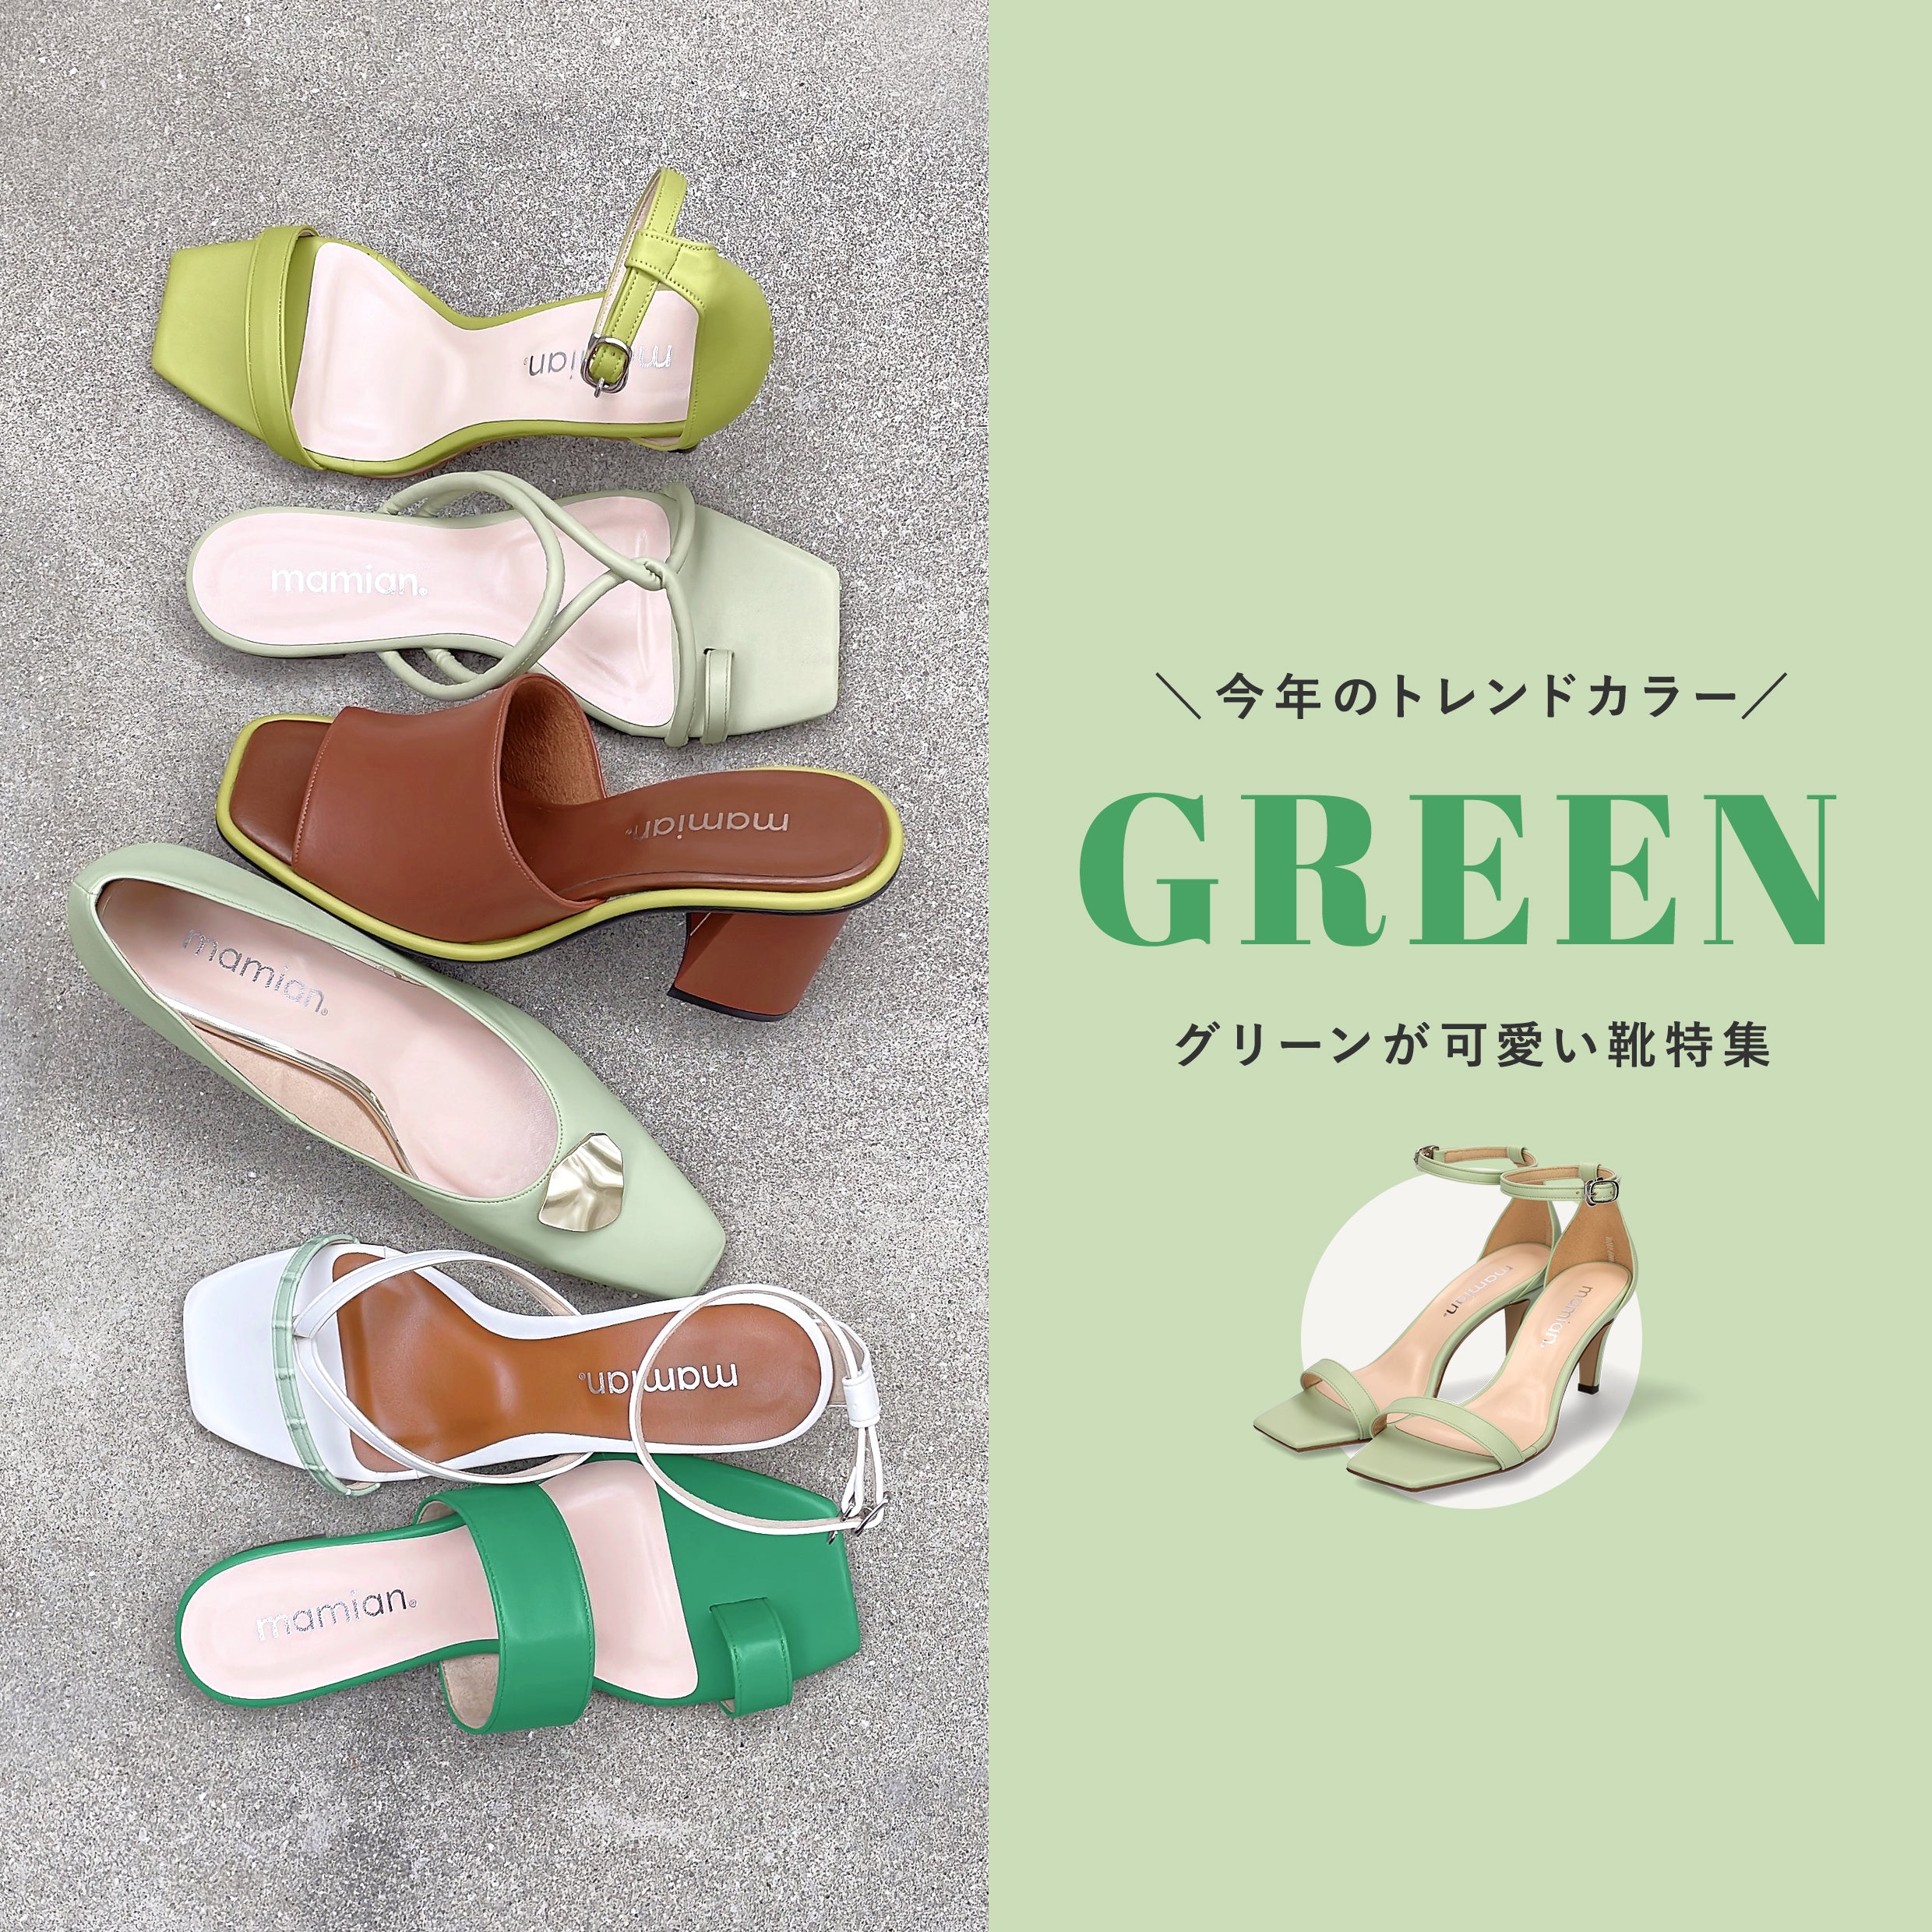 This year's trend color! green feature